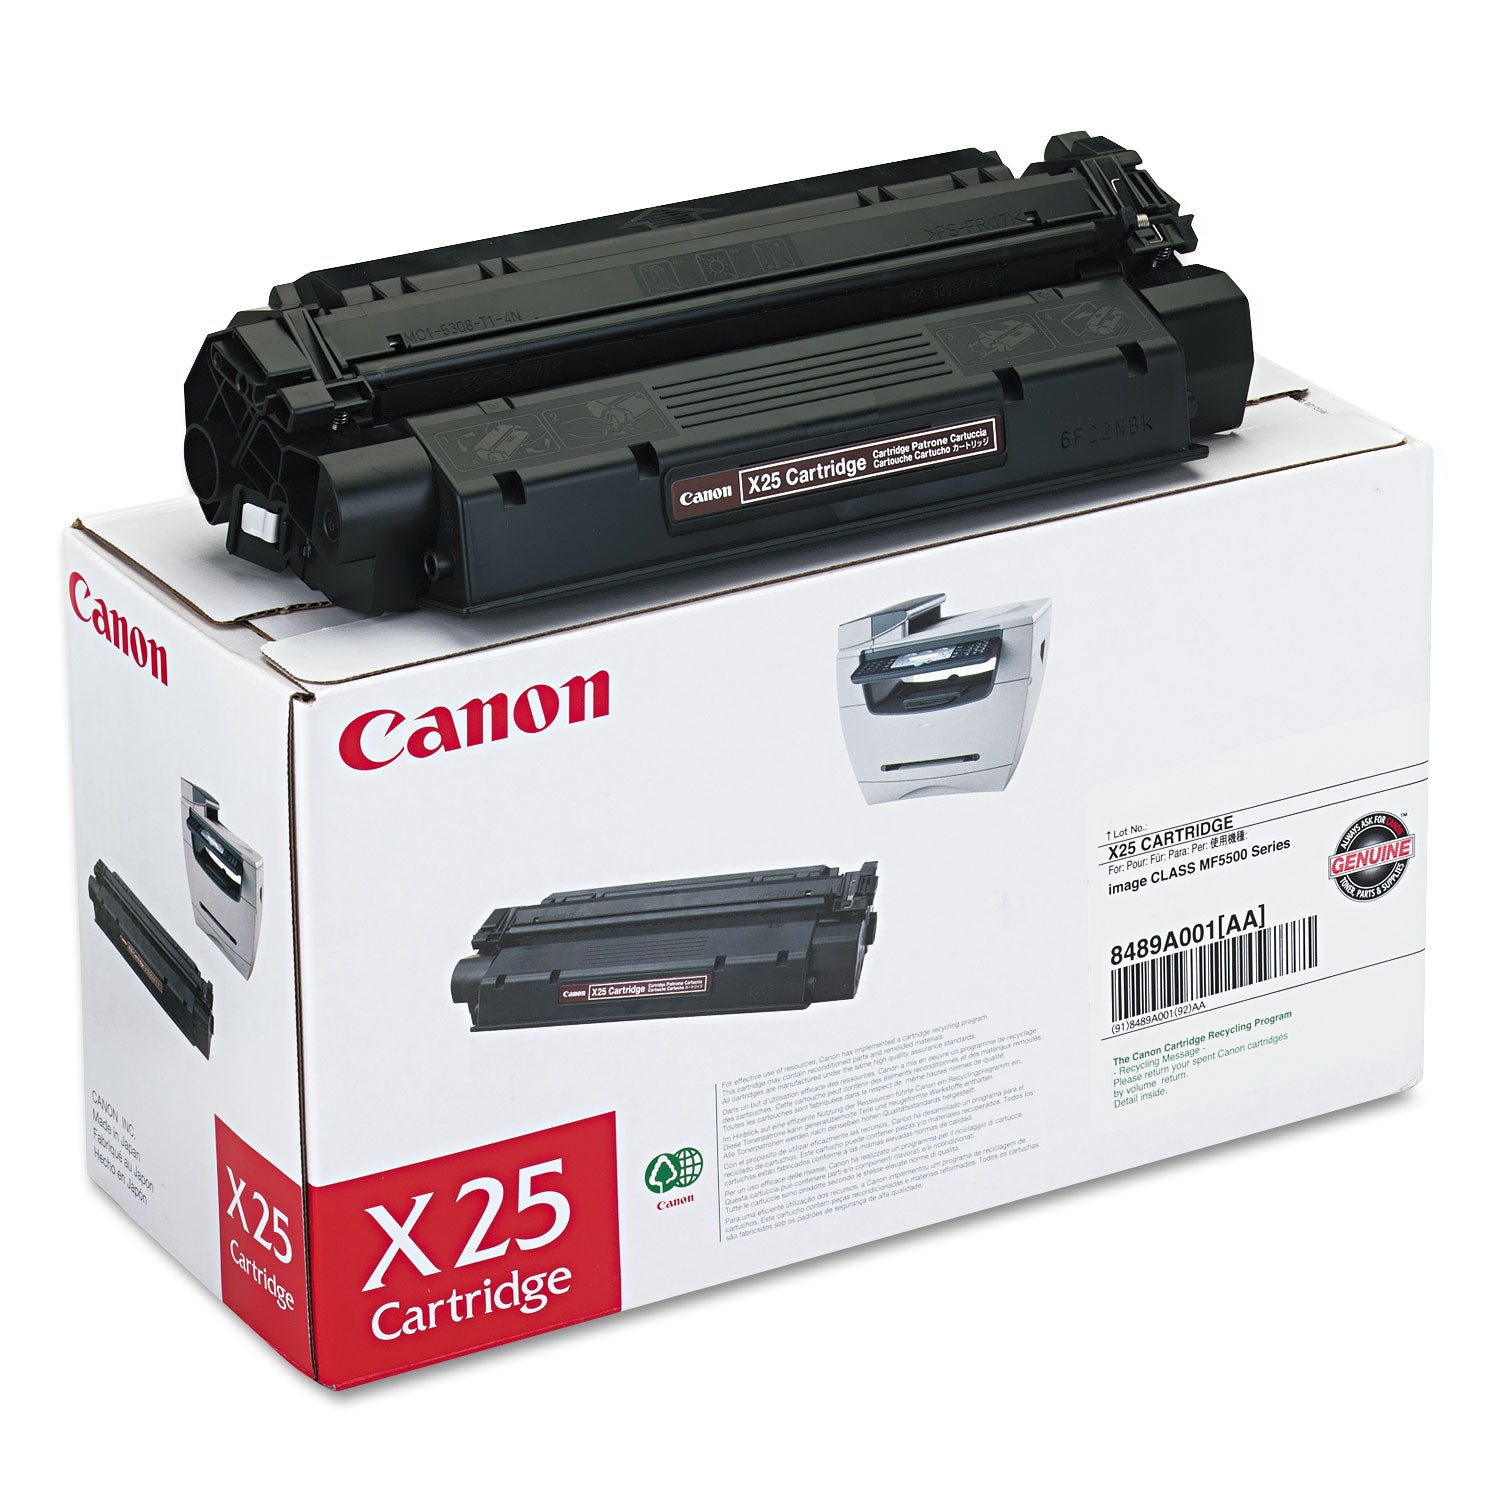 8489a001-x25-toner-2500-page-yield-black_cnm8489a001 - 1